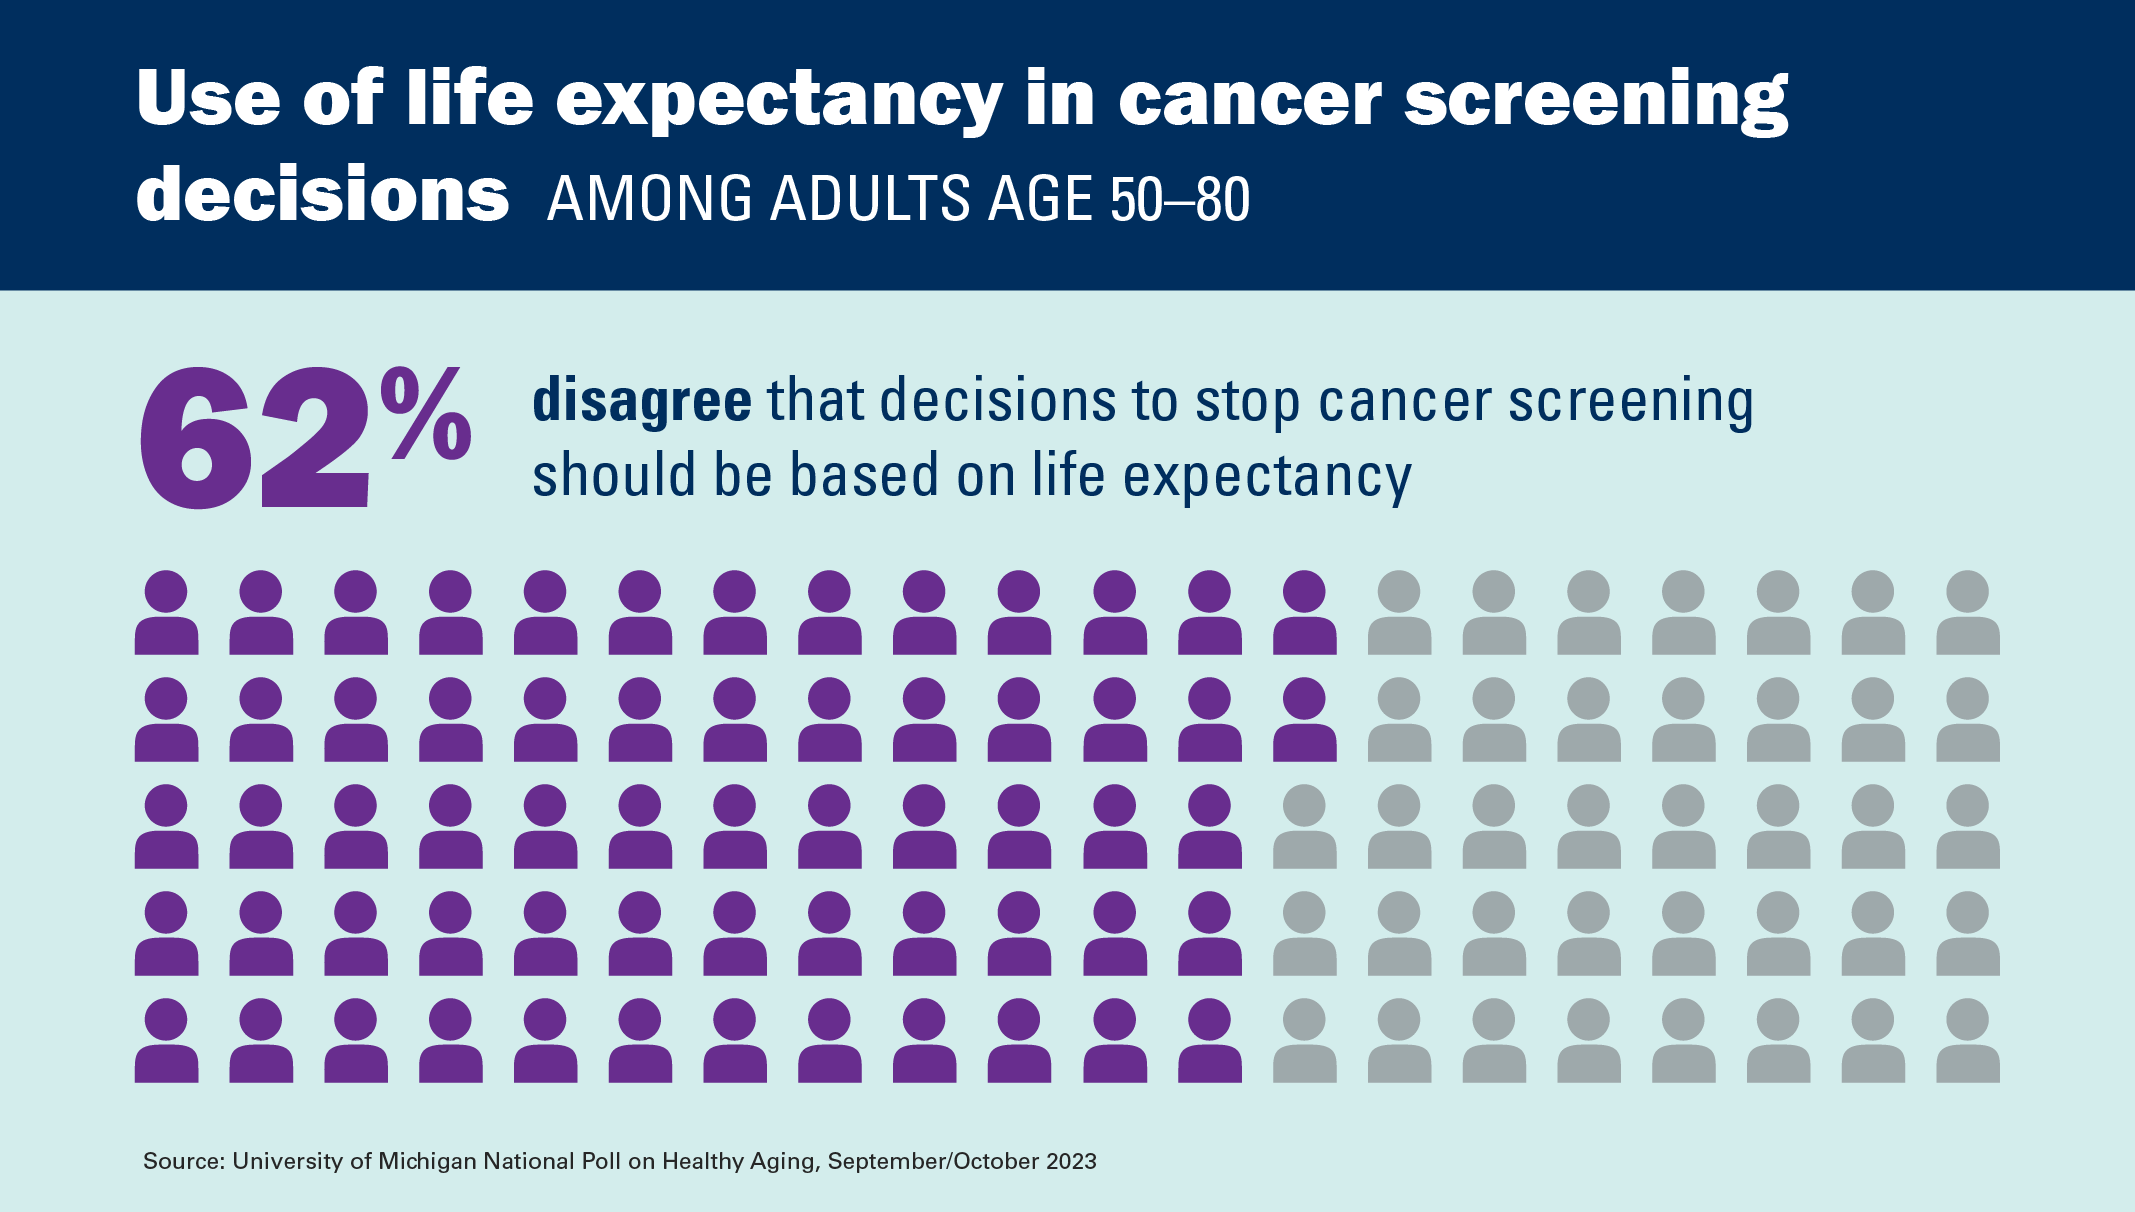 Use of life expectancy in cancer screening decision among adults age 50-80; 62% disagree that decisions to stop cancer screening should be based on life expectancy